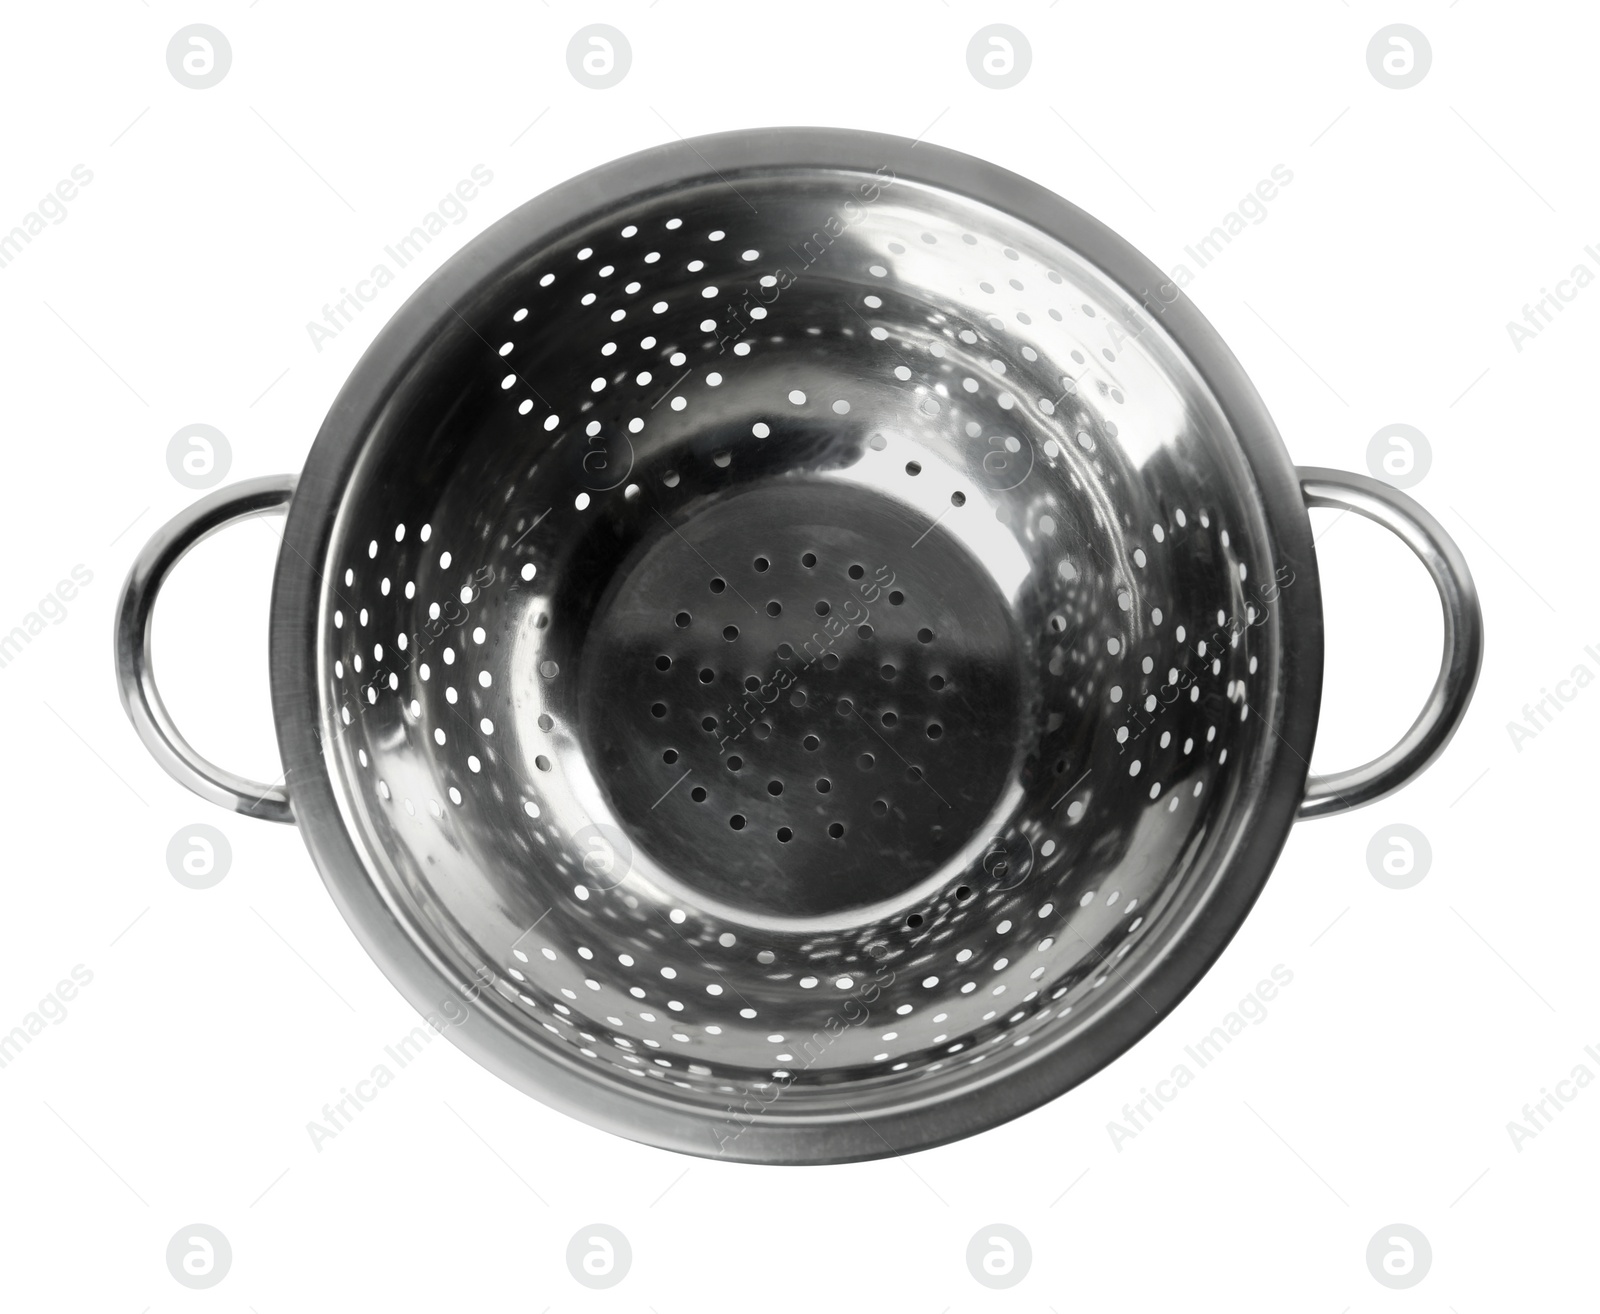 Photo of New clean colander isolated on white, top view. Cooking utensils